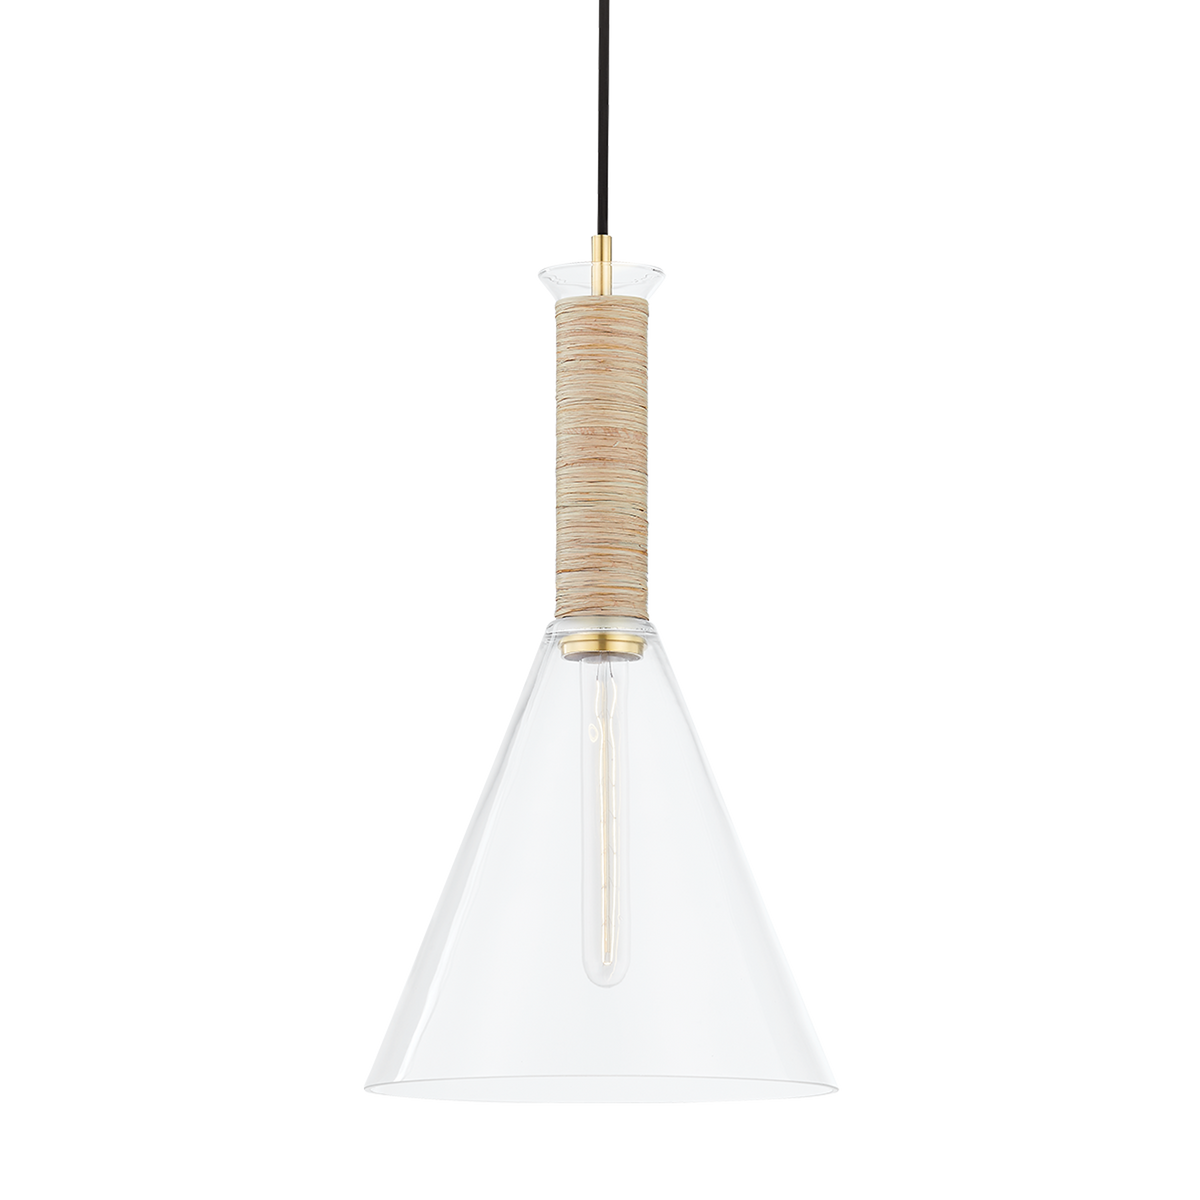 The Besa Ceiling Light uses a cone-shaped shade in clear glass that lets brilliant, bright light shine through.